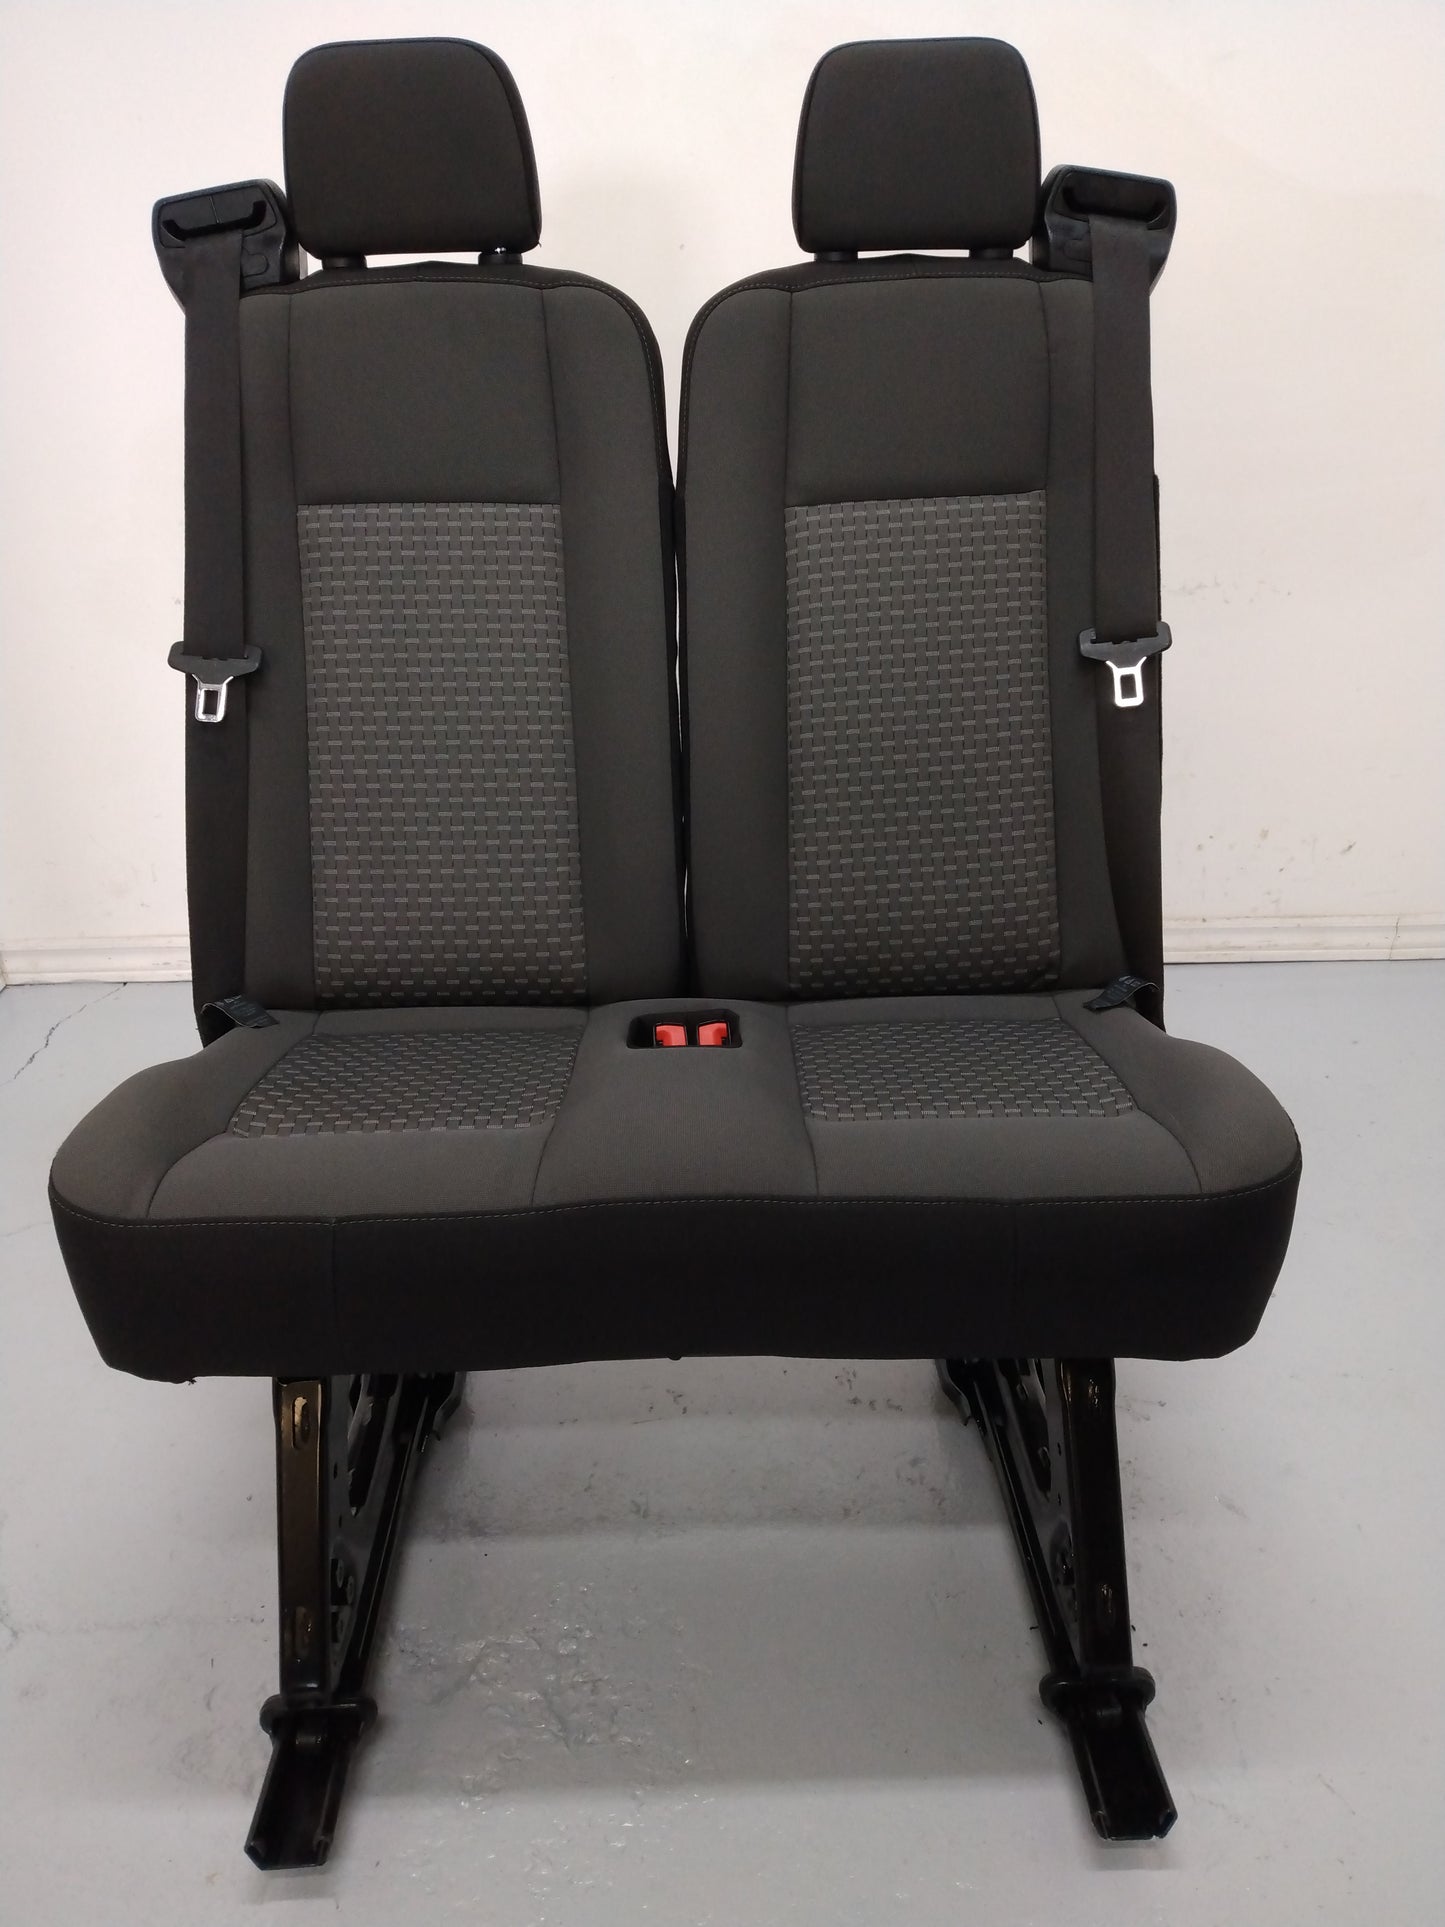 2022 Ford Transit van black cloth 2 position bench seat. This is a 31 inch wide center mount seat | quick release removable universal fit cargo custom install camper work